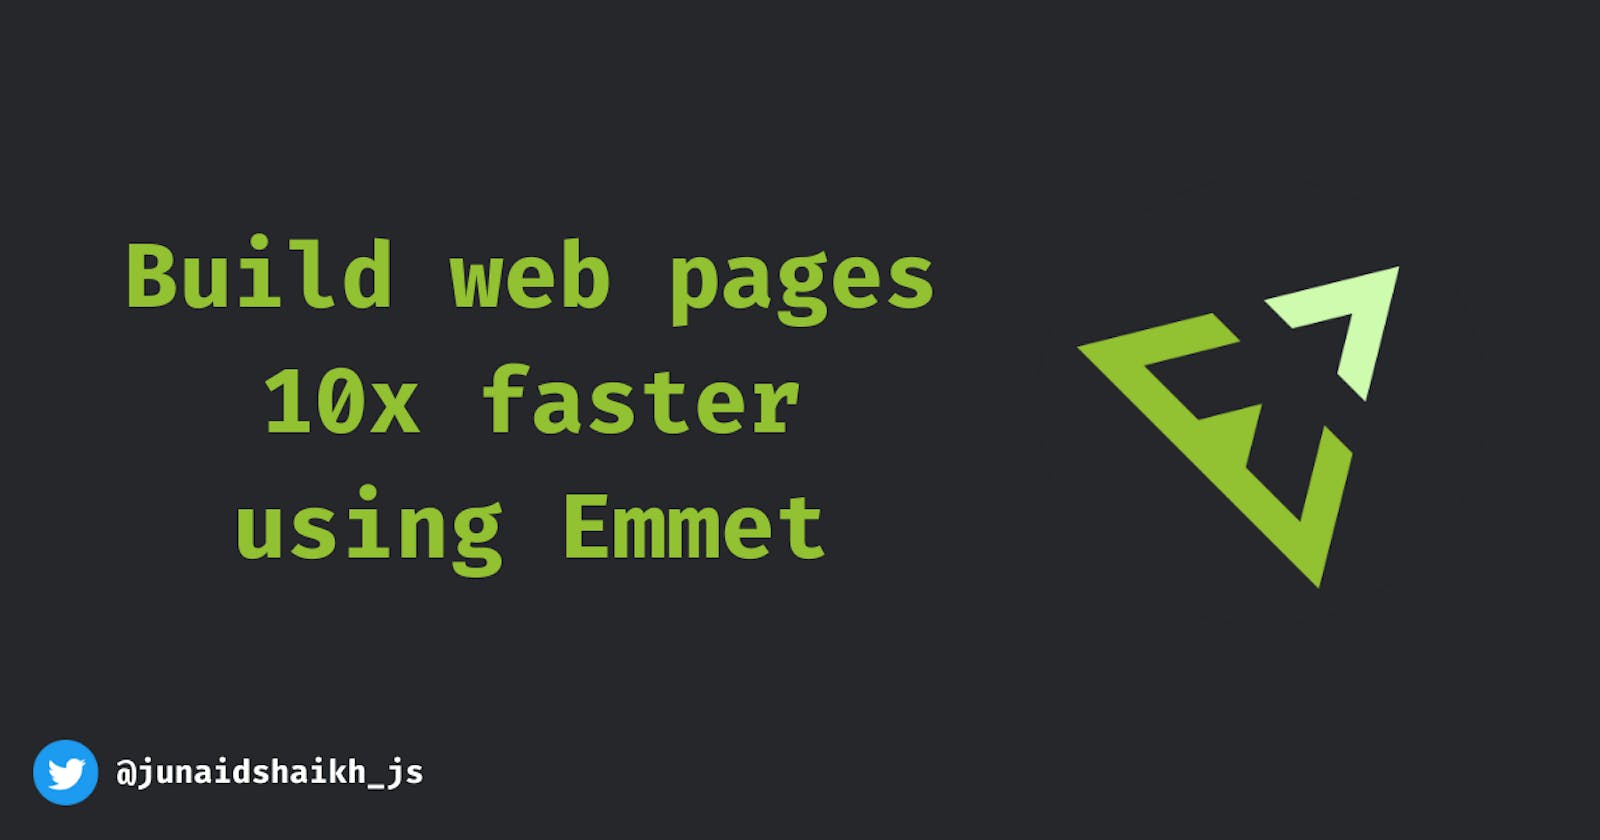 Build Web Pages 10x Faster Using Emmet